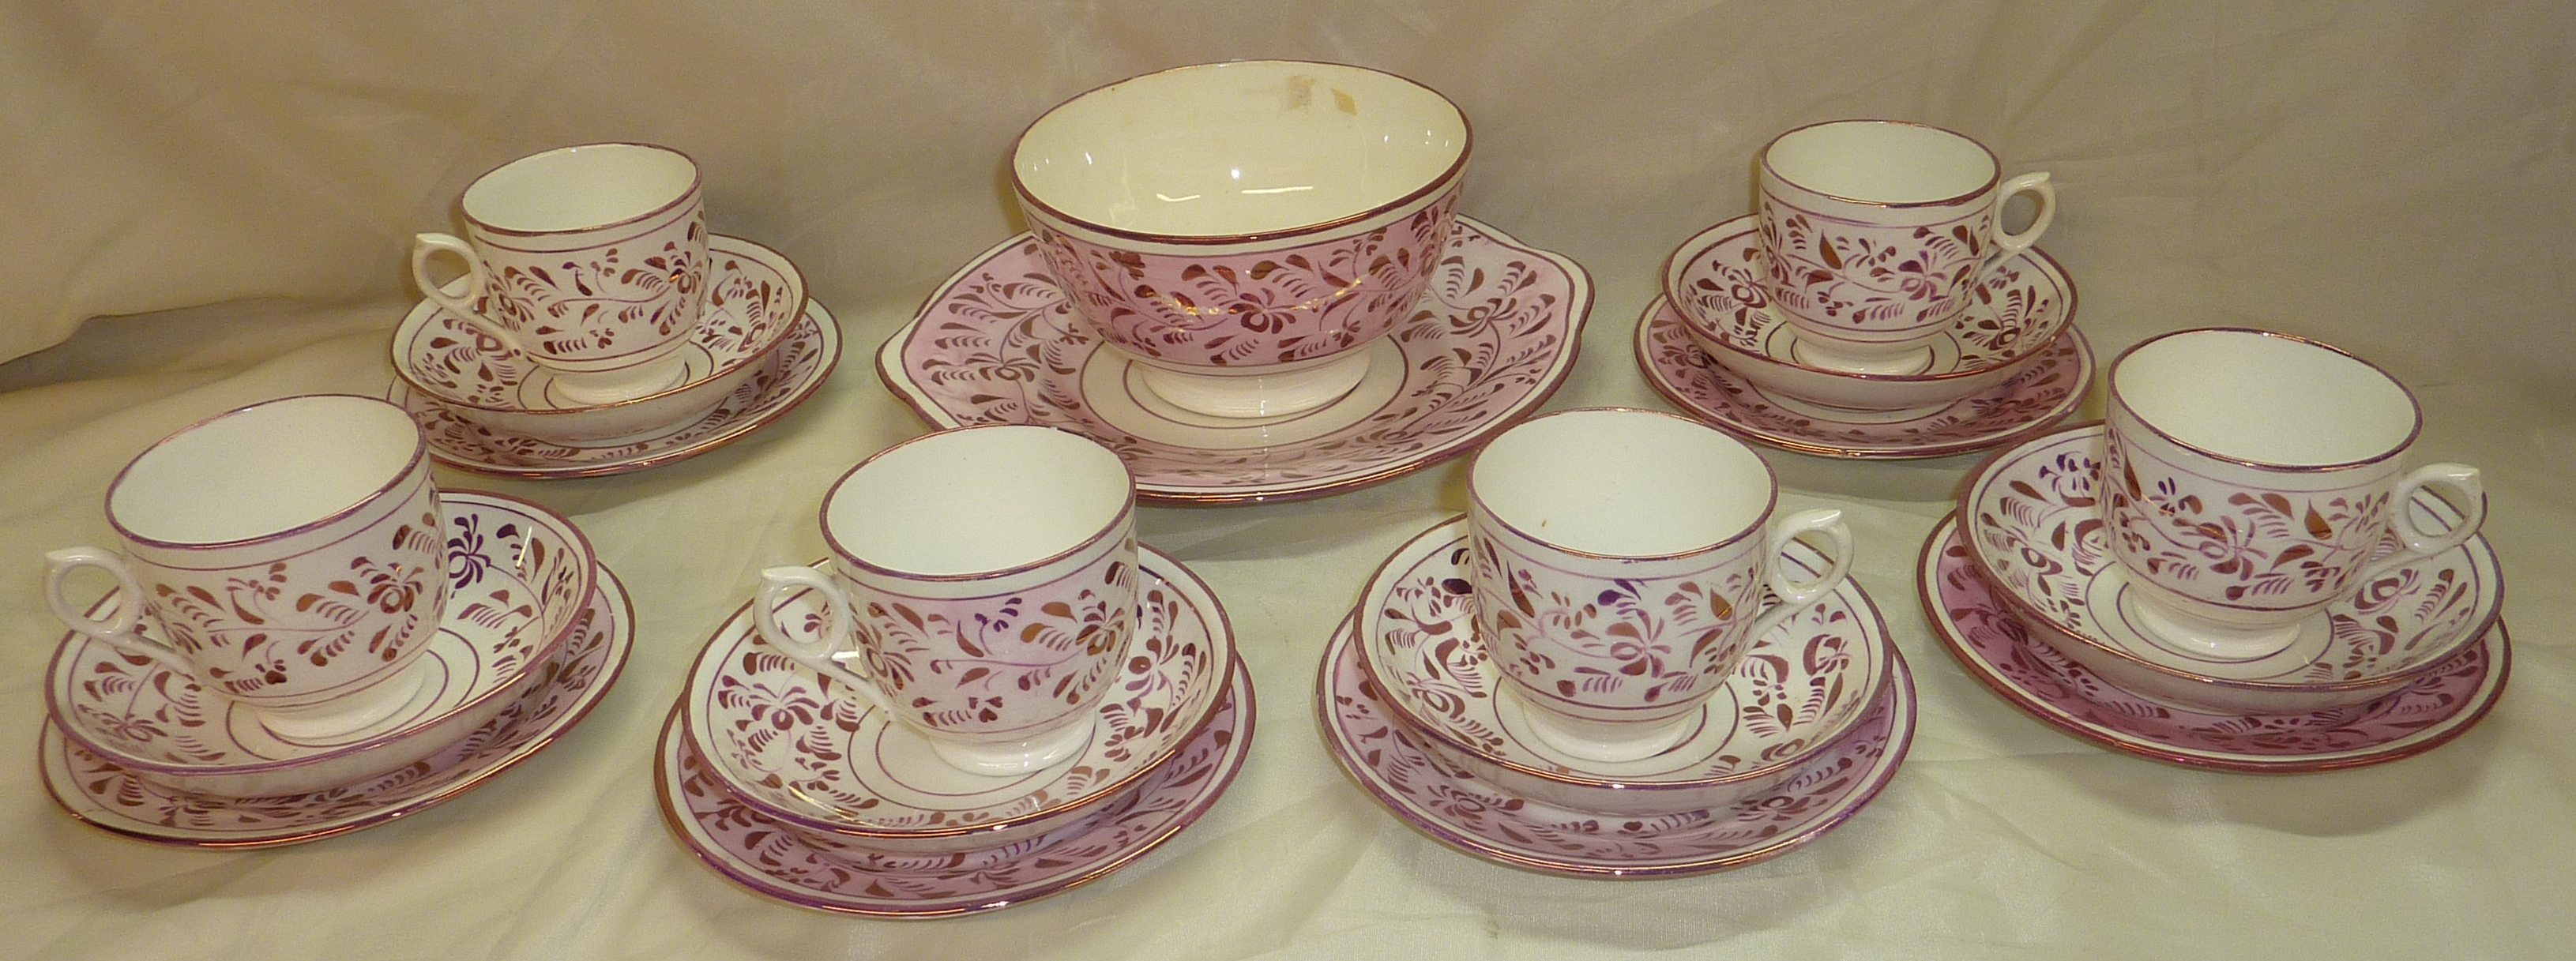 19th C lustre ware tea service comprising 6 cups, saucers & side plates with matching cake plate &